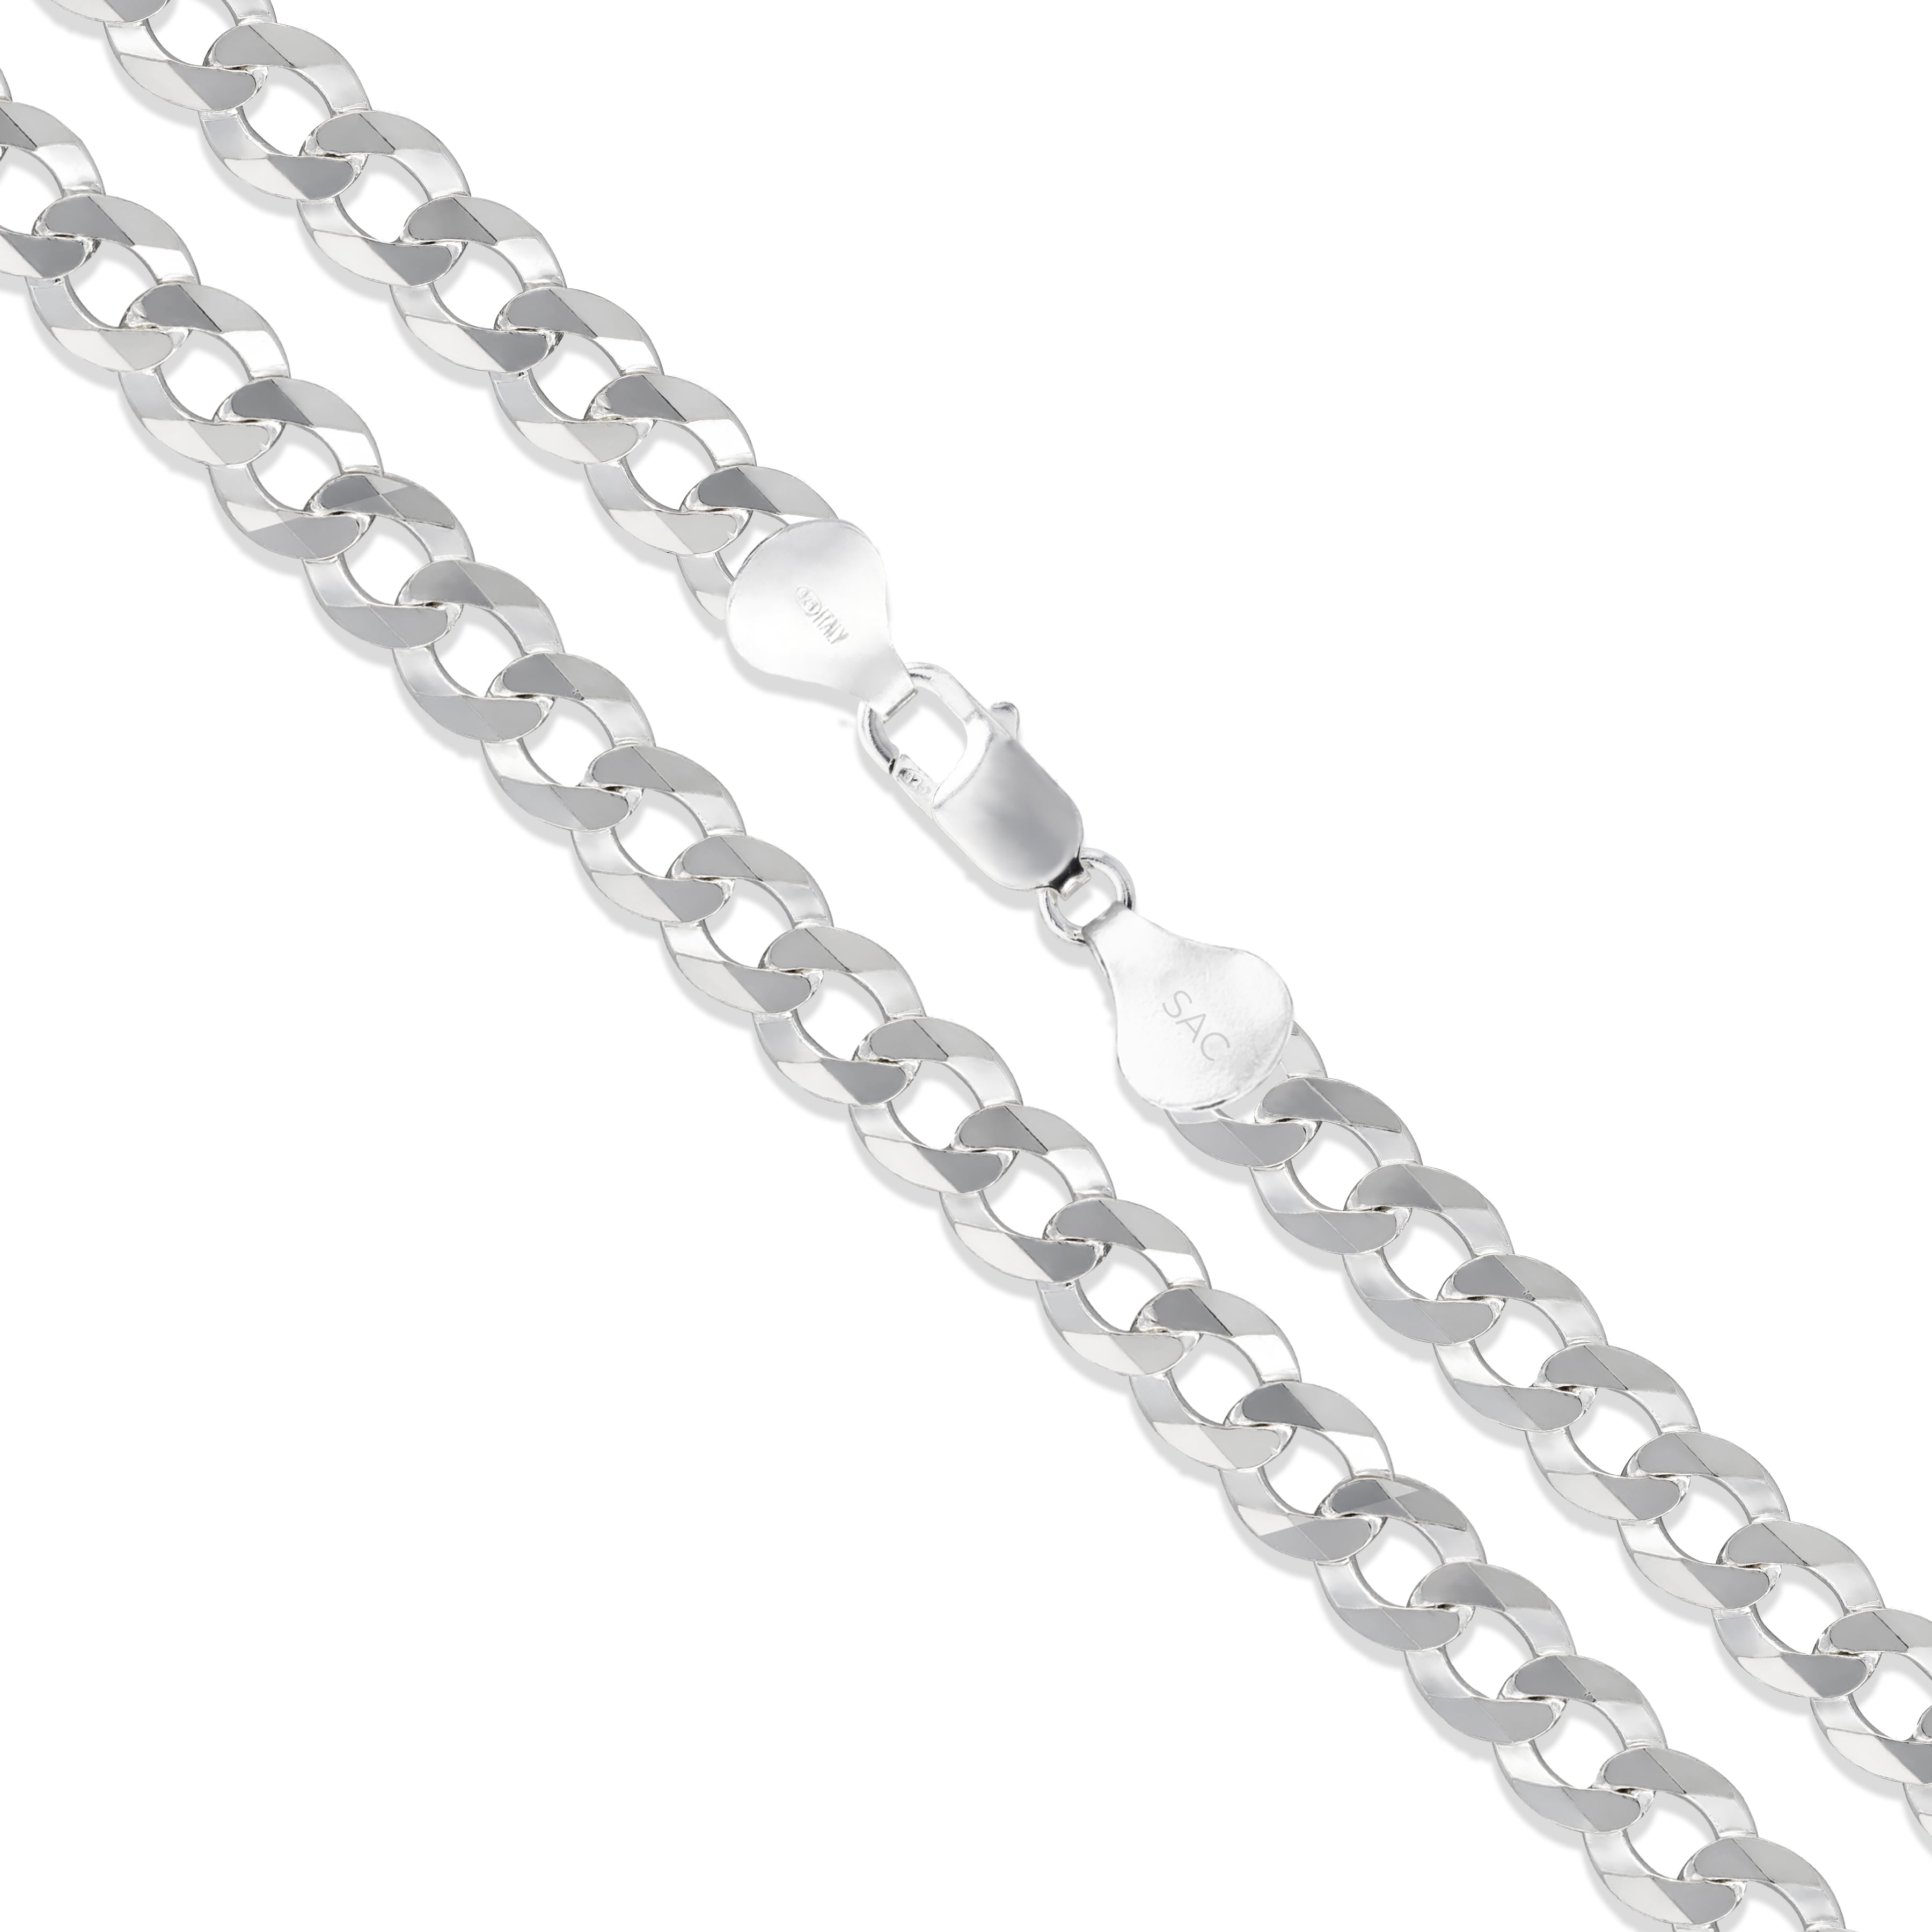 STERLING SILVER FLAT CURB DIAMOND CUT LINK 16" UP TO 24" PLUS CHAIN NECKLACE BOX 